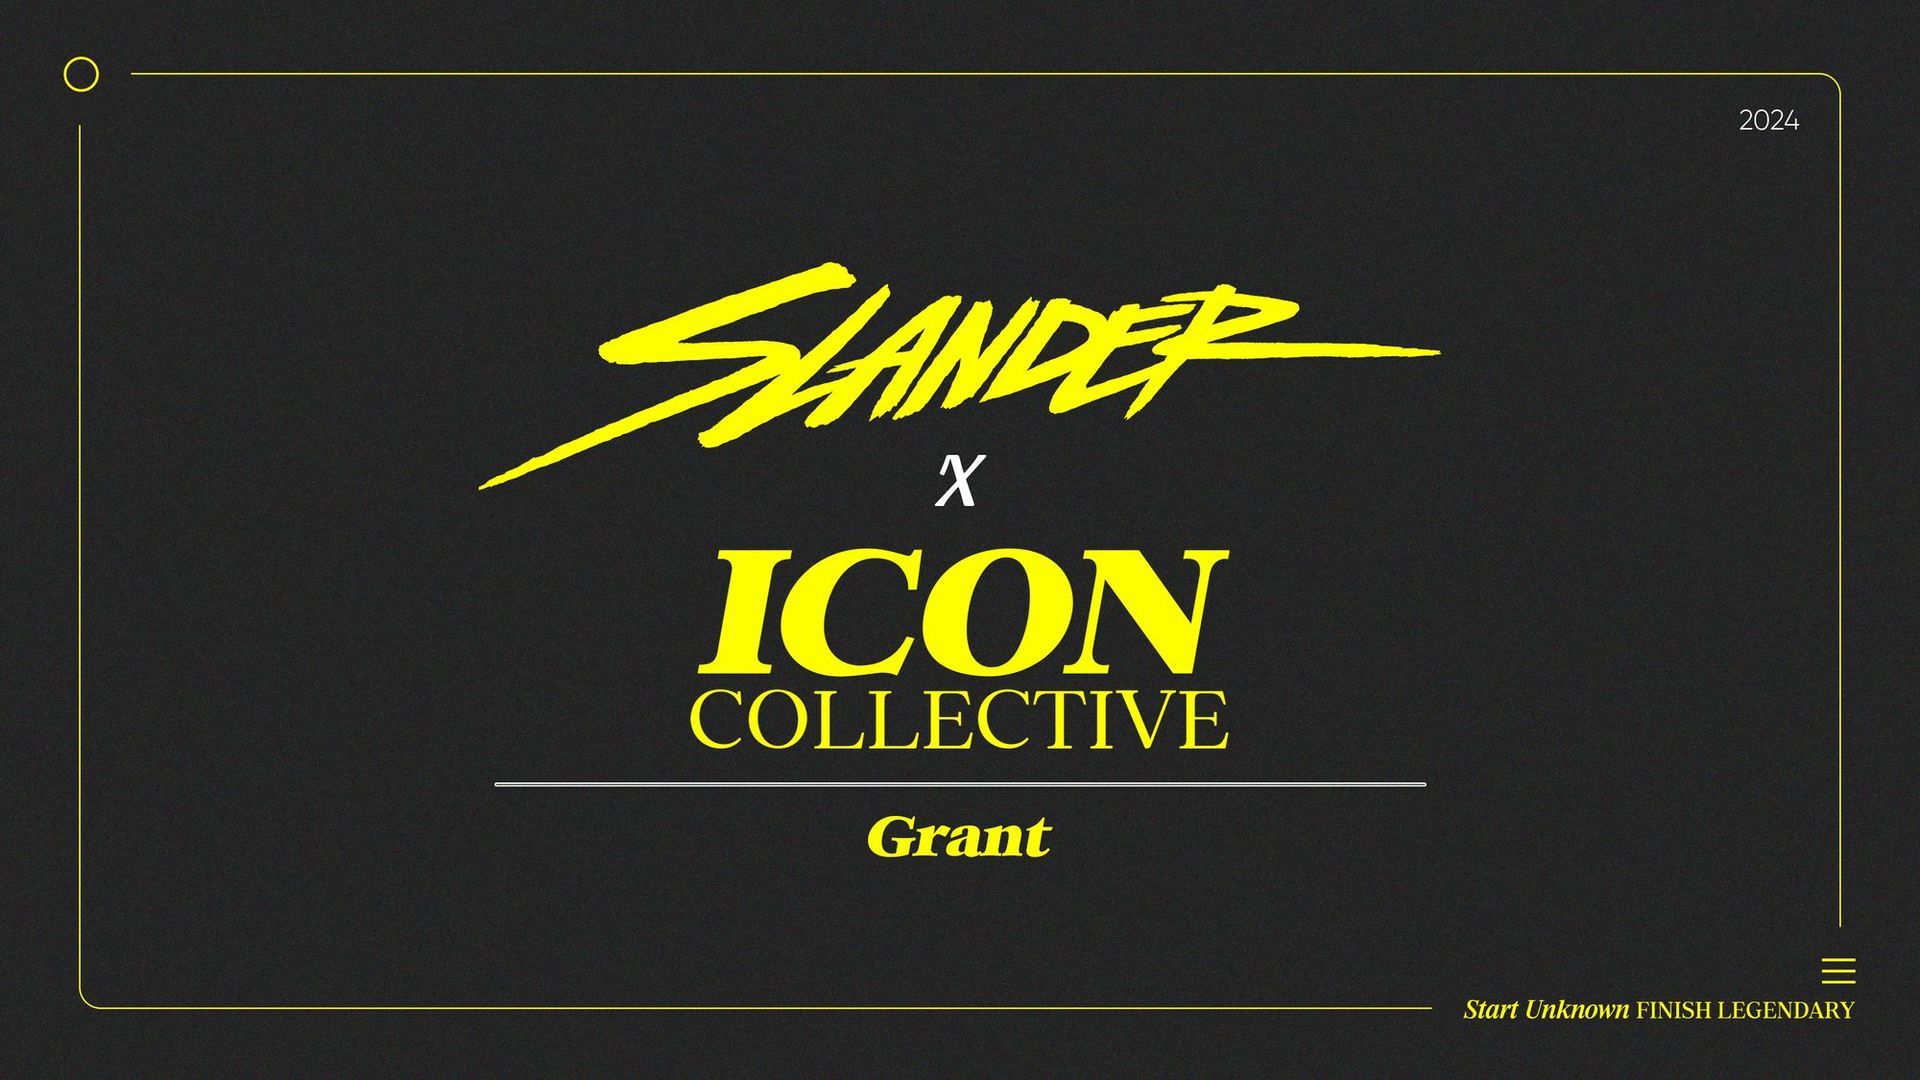 A black and yellow logo for slander x icon collective